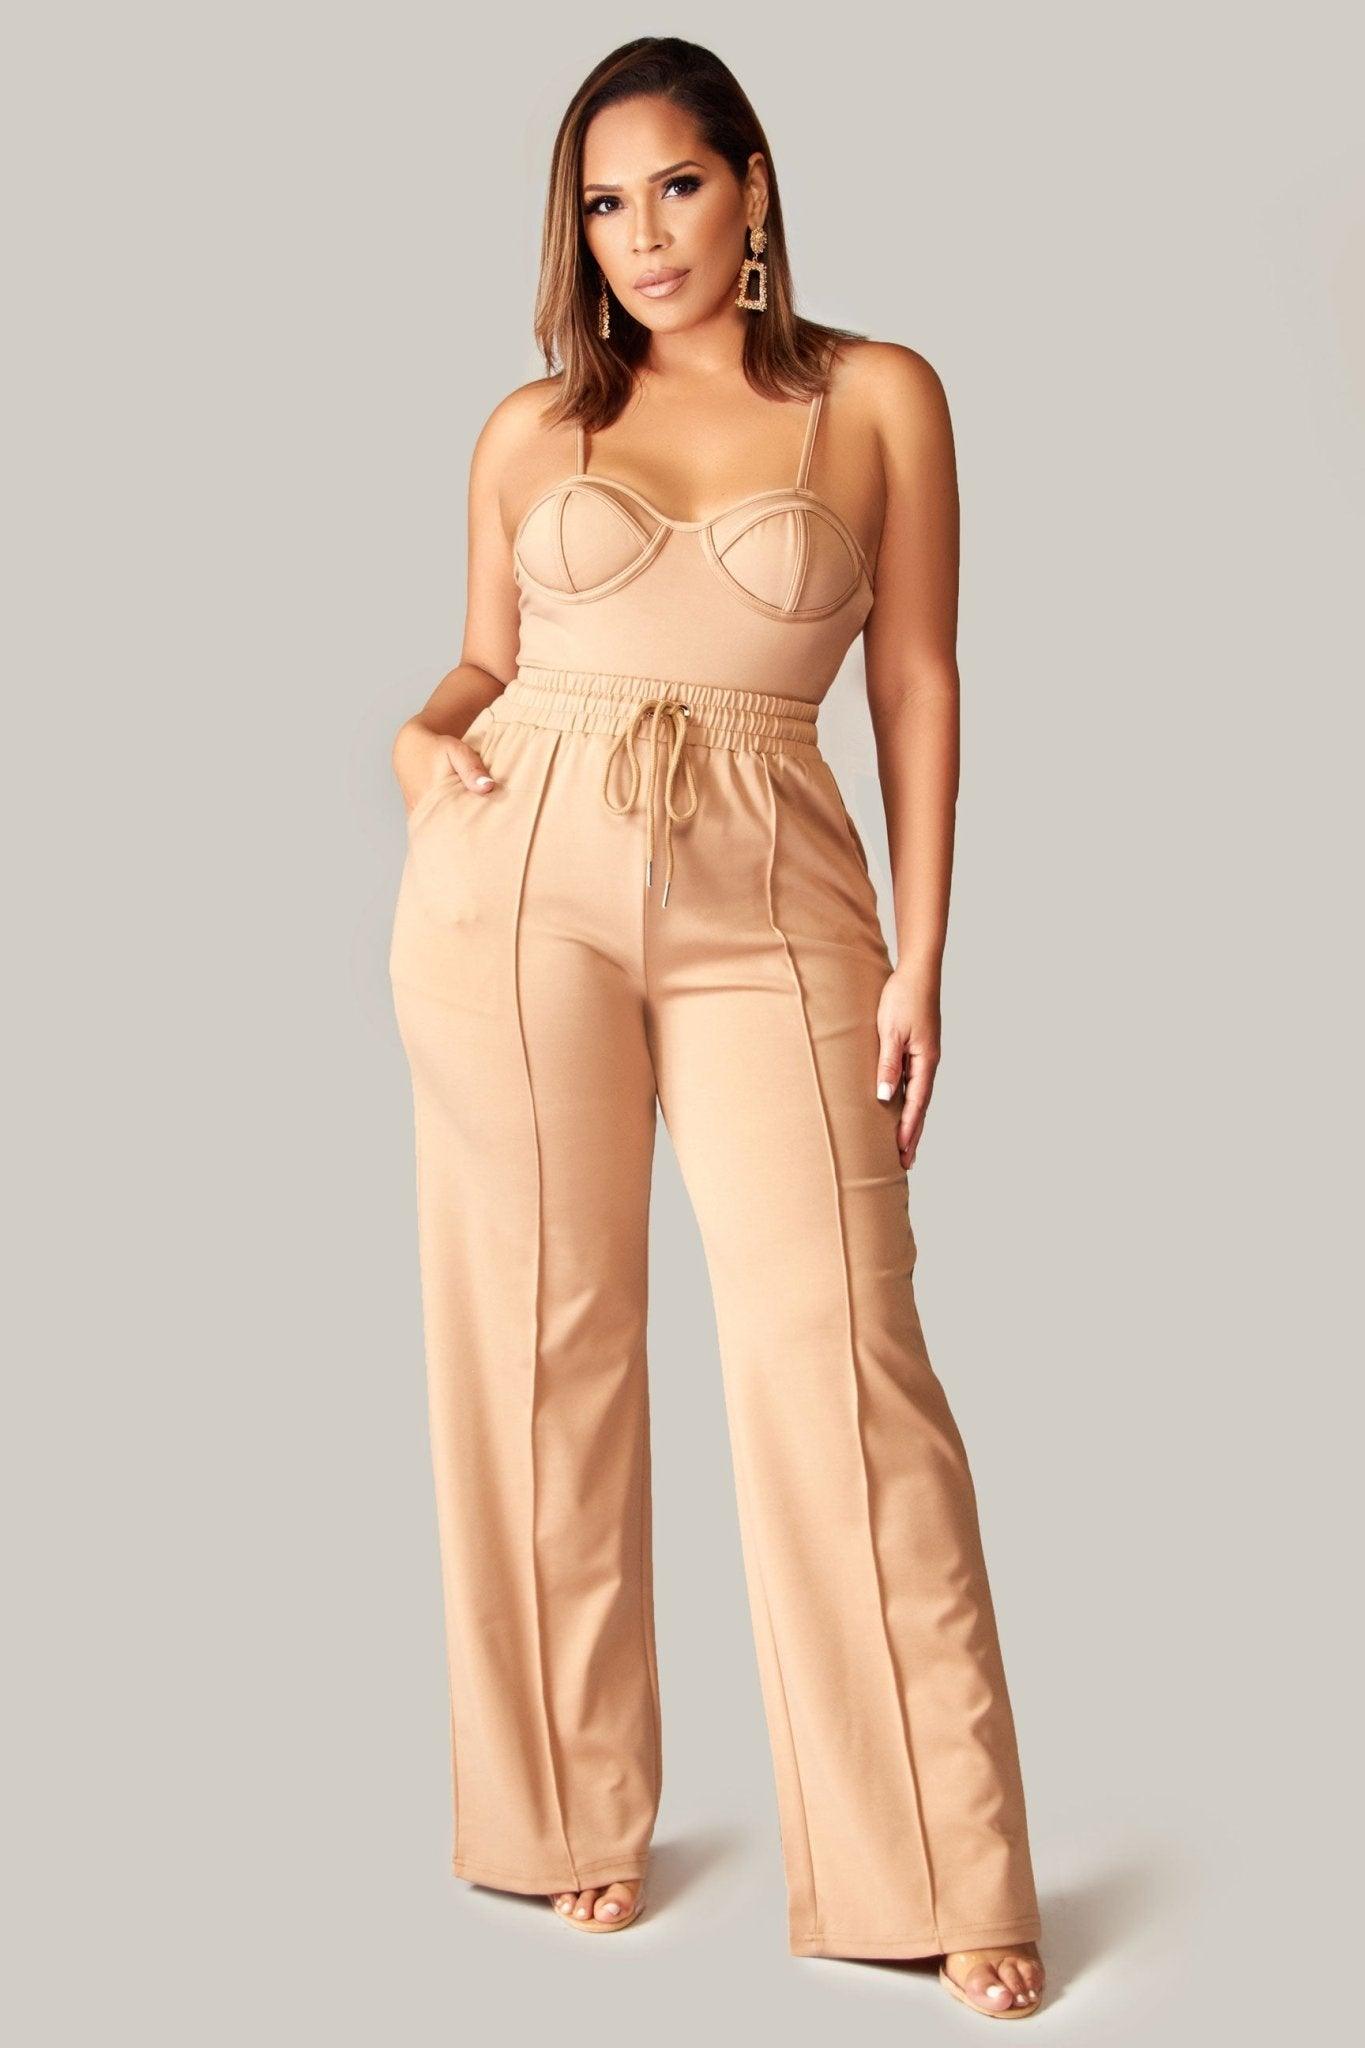 Rhiana High Couture 2 PC Set - MY SEXY STYLES